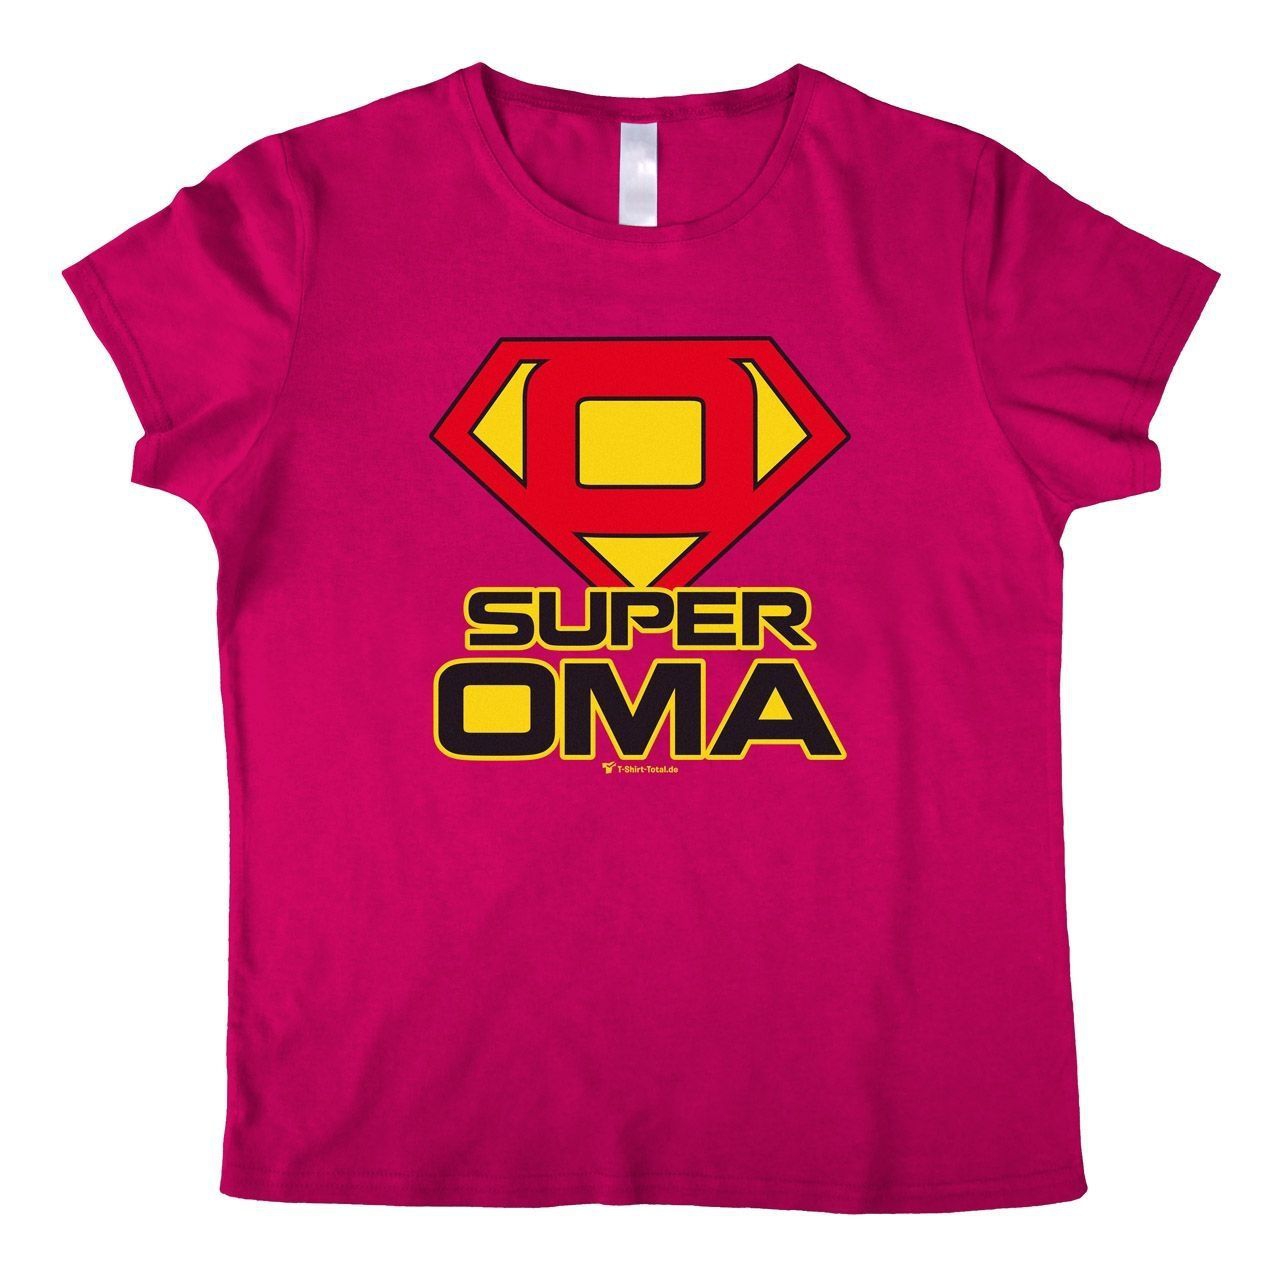 Super Oma Woman T-Shirt pink Extra Large